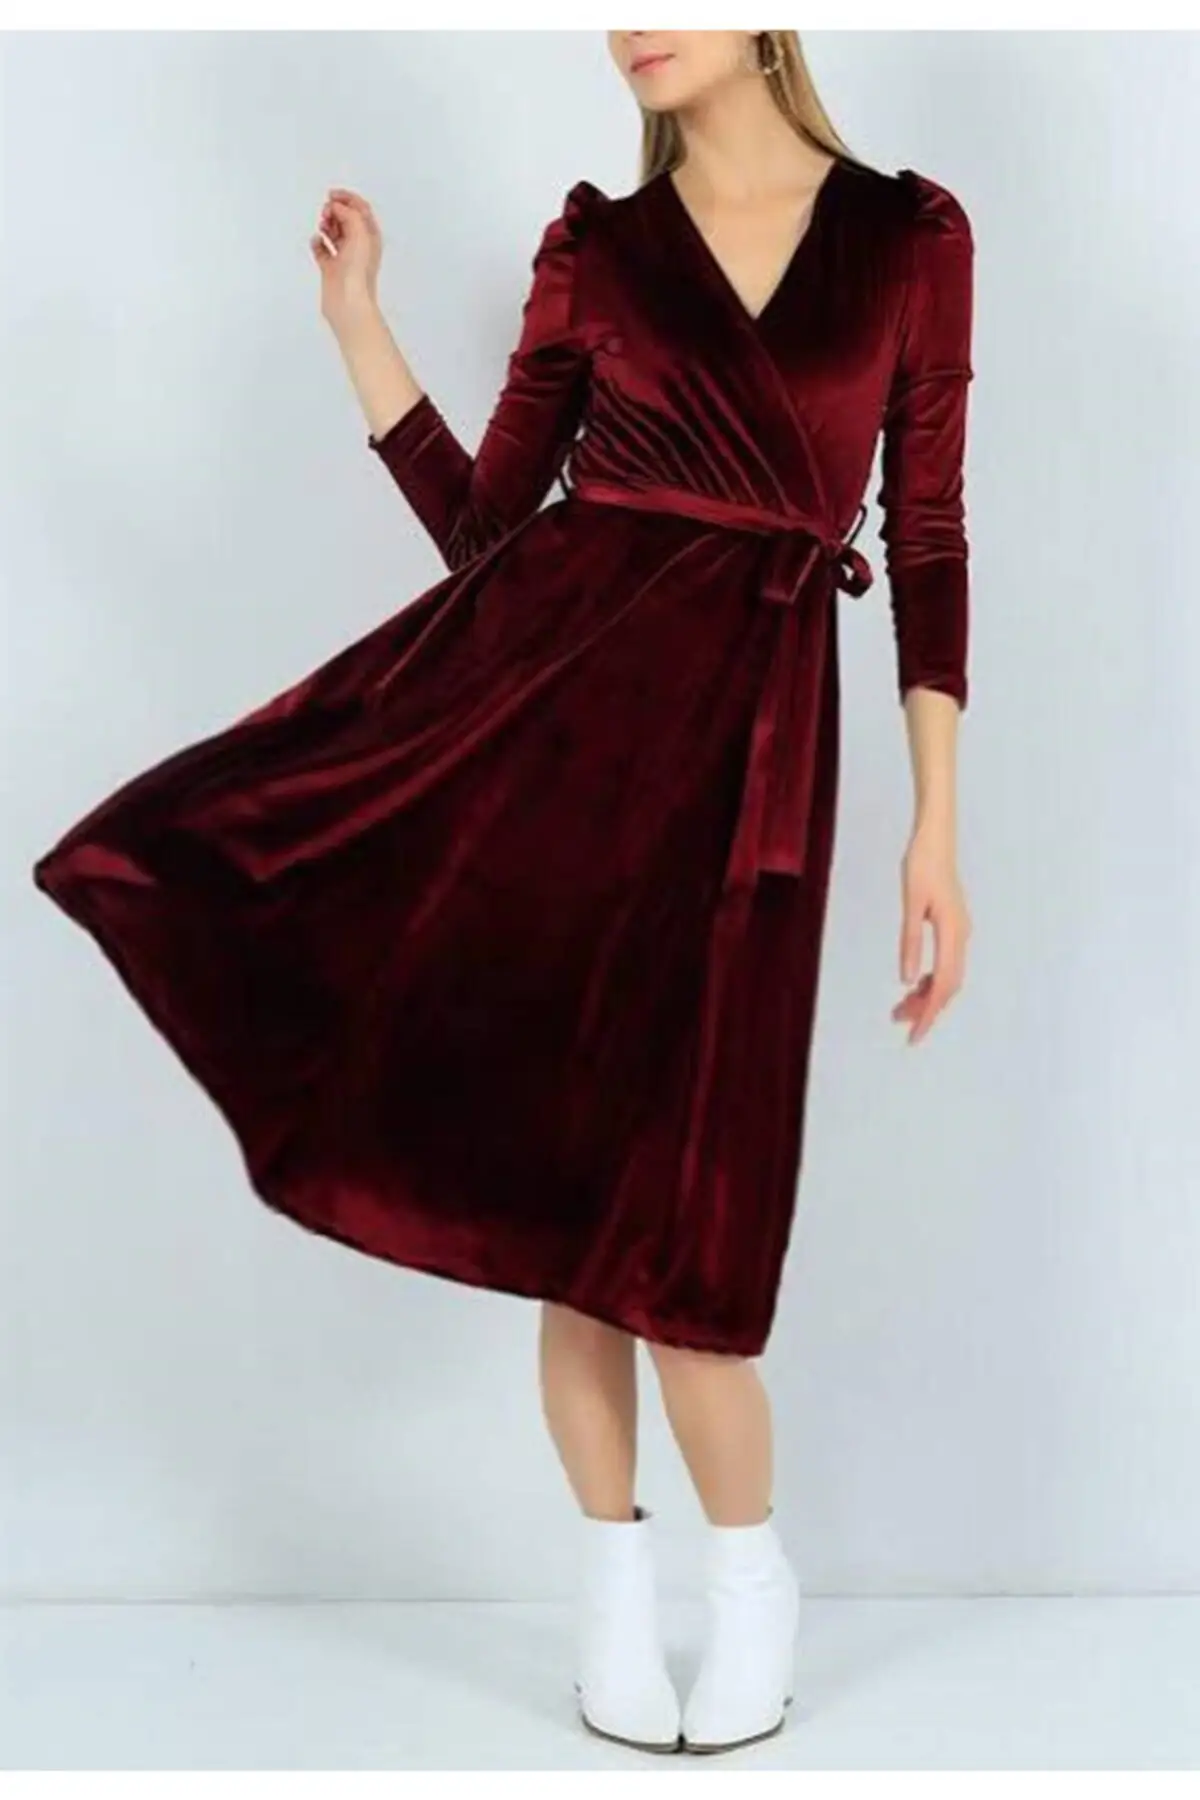 

Belted Midi Boy Double Breasted Collar Velvet Dress Long Fabric Classic Burgundy Flexible Large Size Clothing